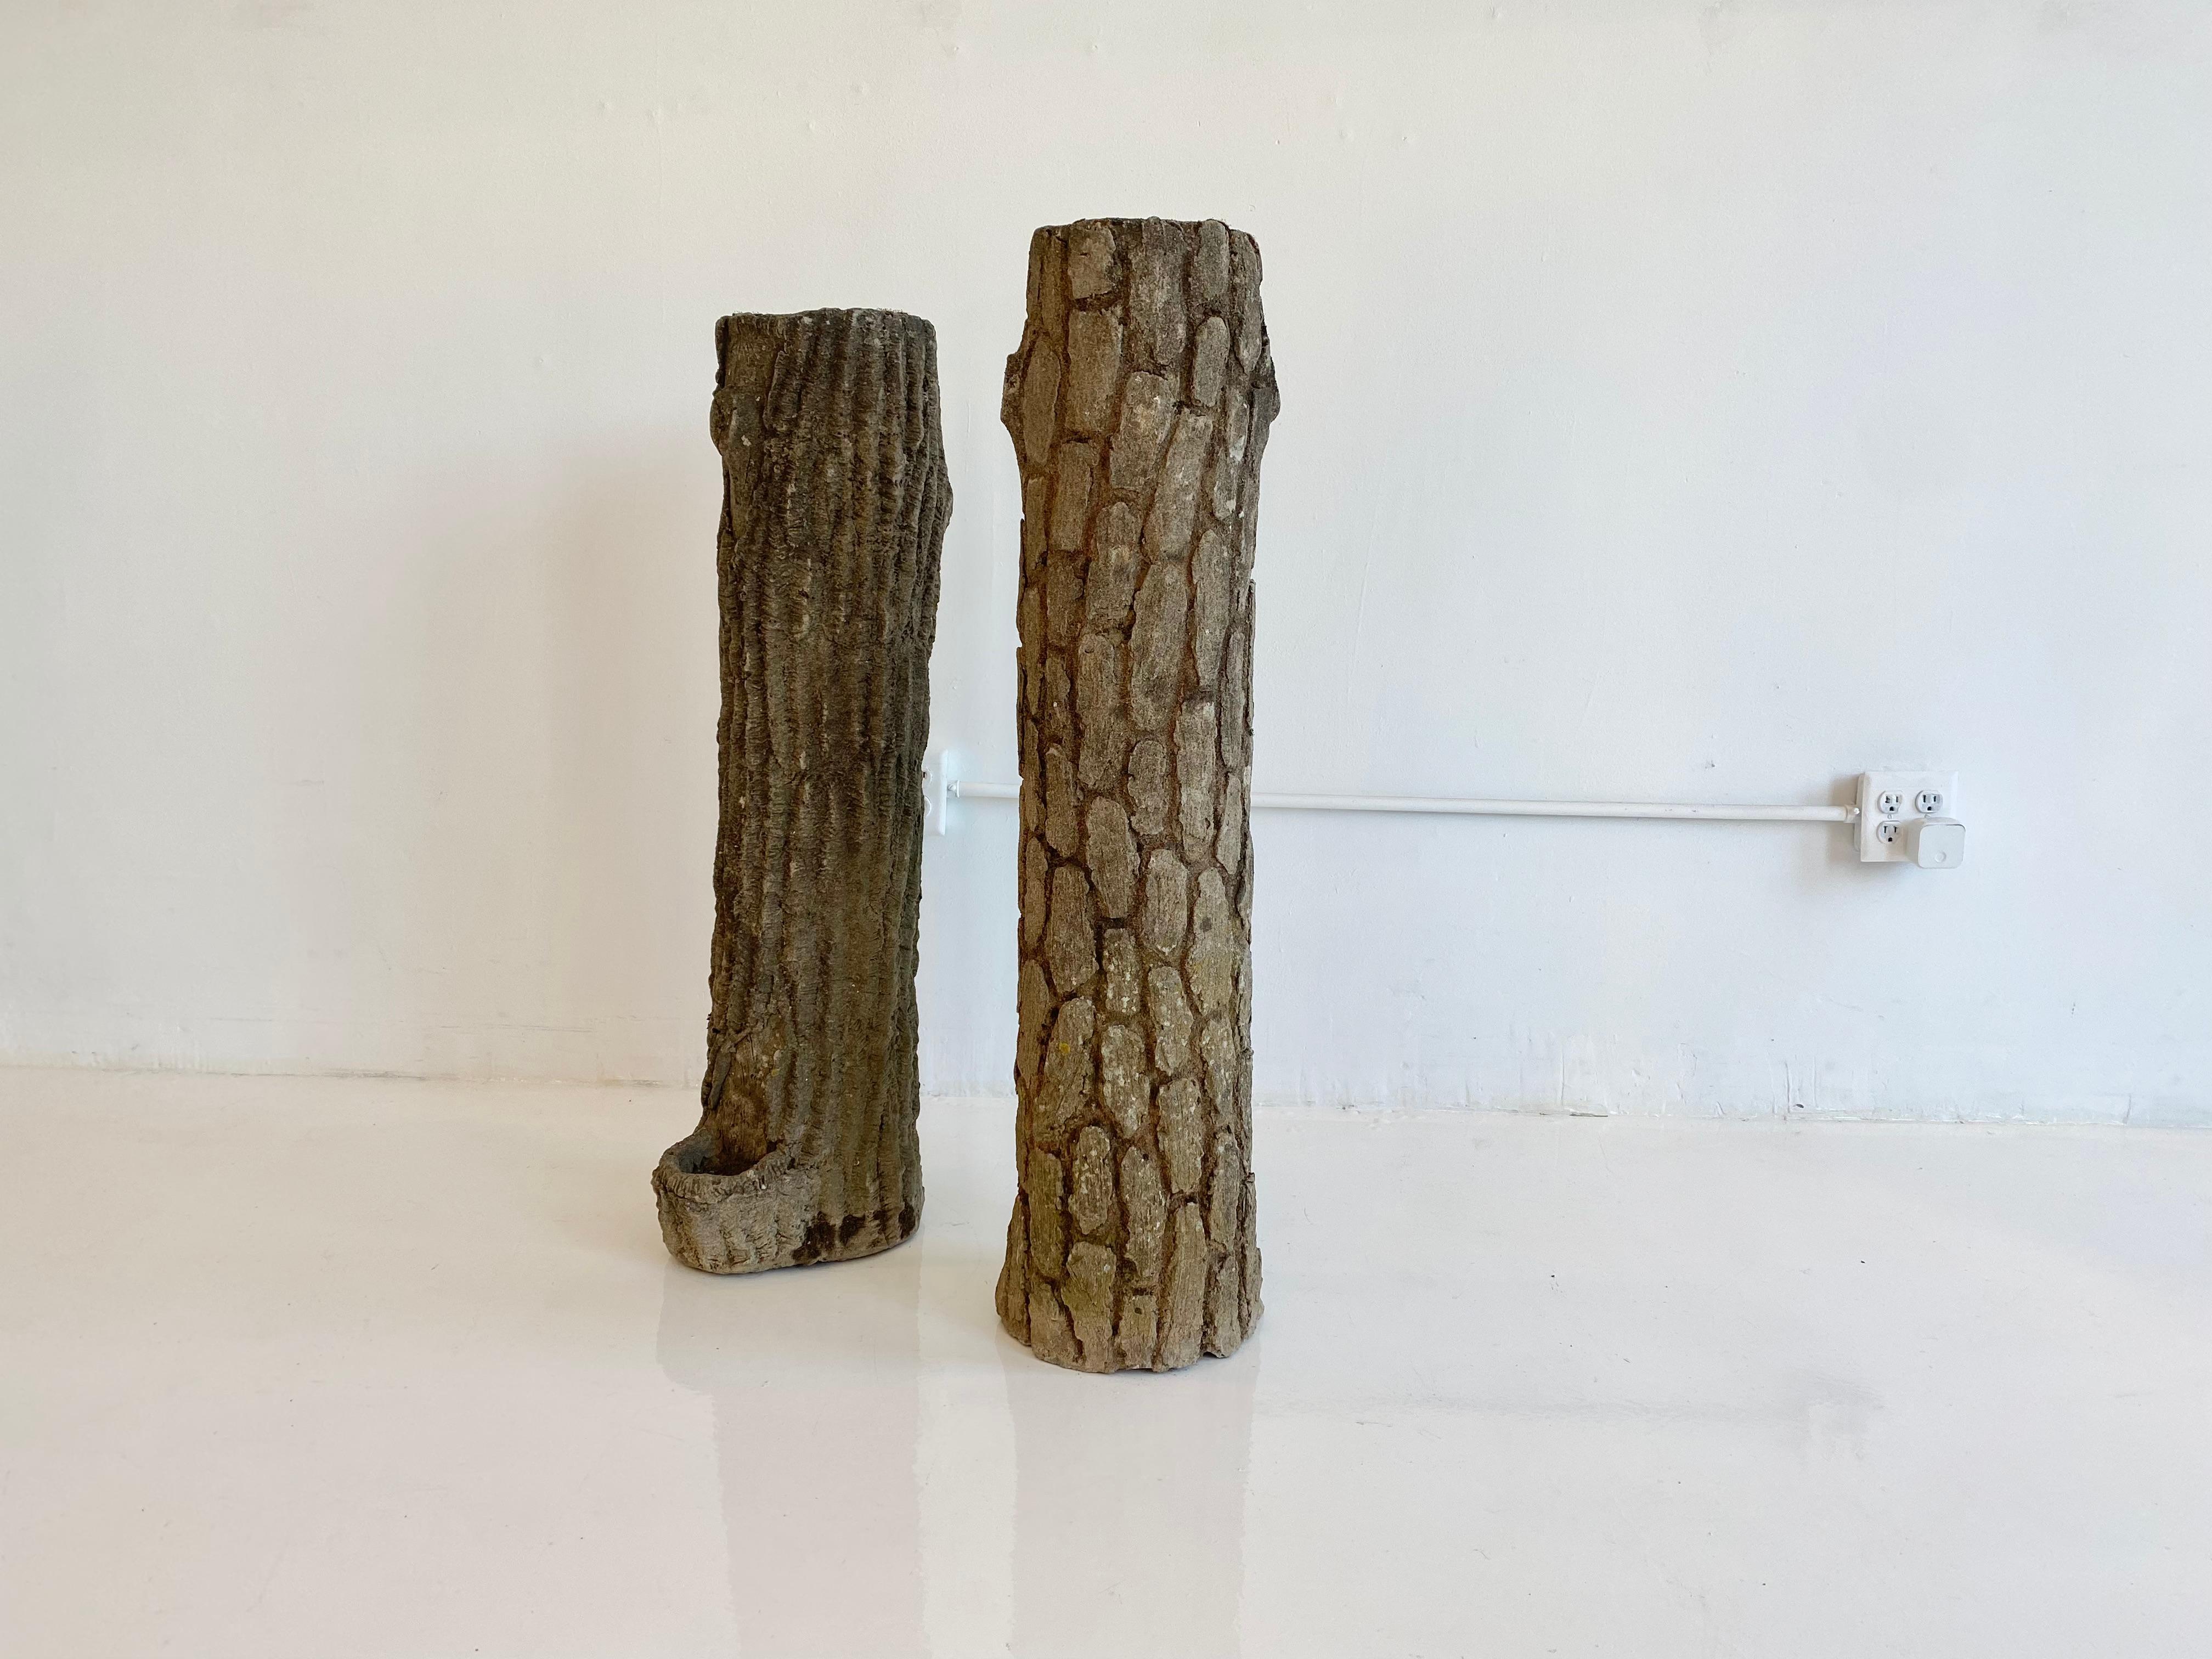 Unusual pair of Faux Bois planters made of concrete, in the form of tree stumps. Great scale and presence. Slightly different patinas to each planter. Great condition. Priced as a pair. 


Measures: Taller planter 9.5